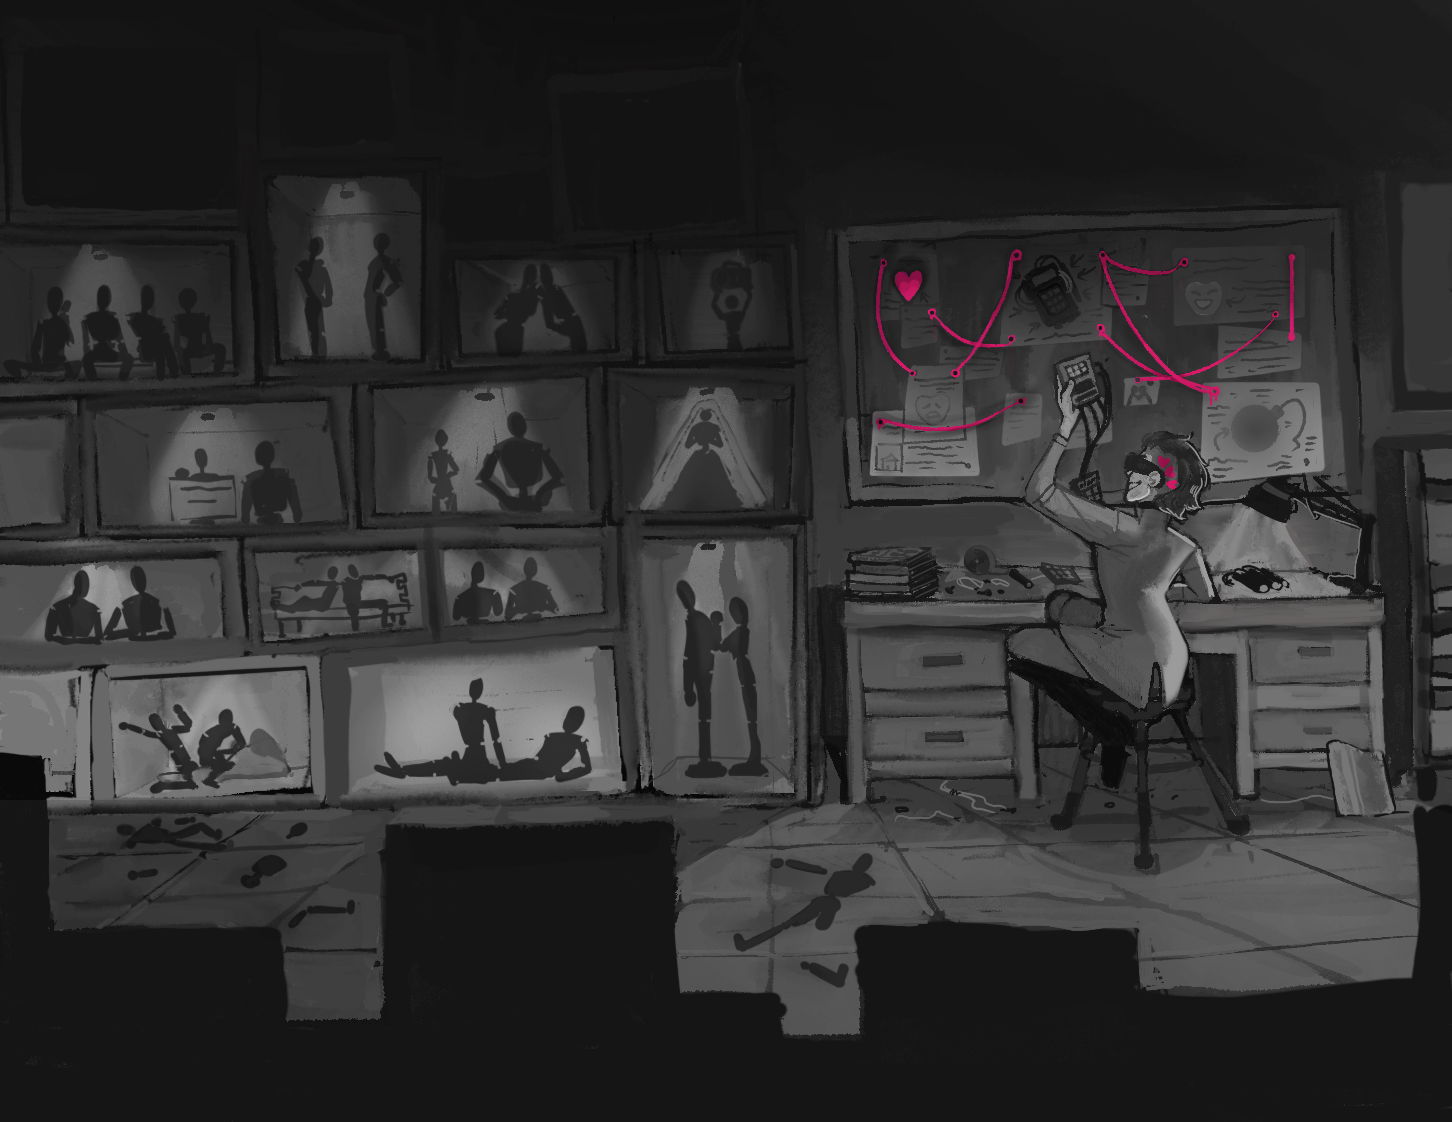 Black and white digitally painted illustration with pink accents. A supervillain works at a desk in a messy workshop on some electronics, illuminated by a lamp. A conspiracy board above them with the Rom Com Drama Bomb symbols. On the left half of the image are stacked displays of dioramas featuring iconic moments from romantic comedies.